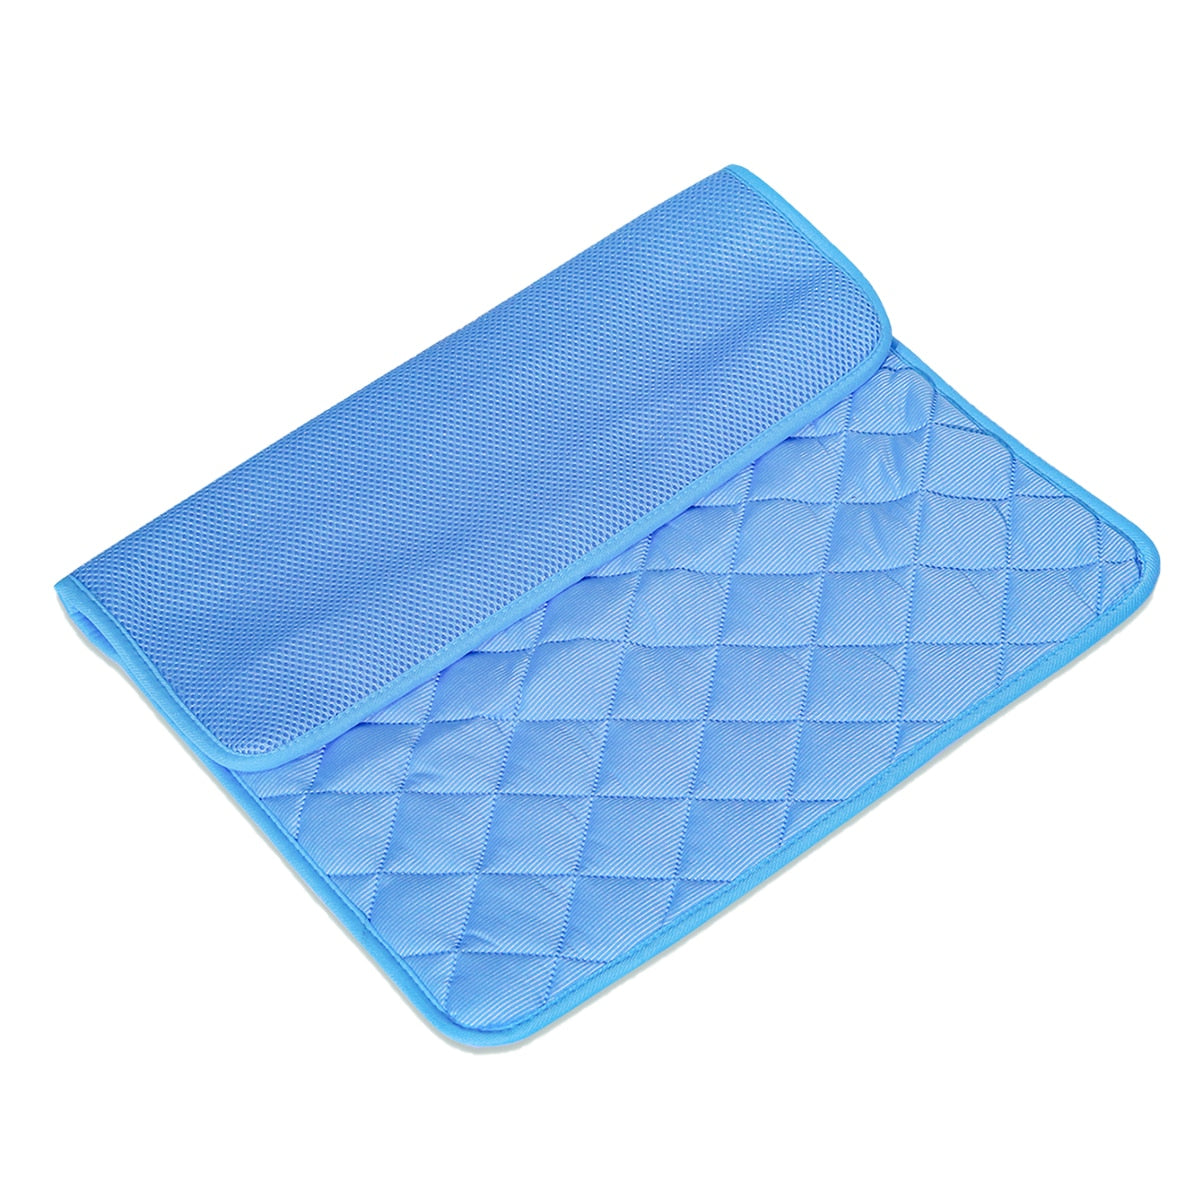 Pet Cooling Bed, Summer Pet Pad that is Breathable and Washable 8 Sizes.